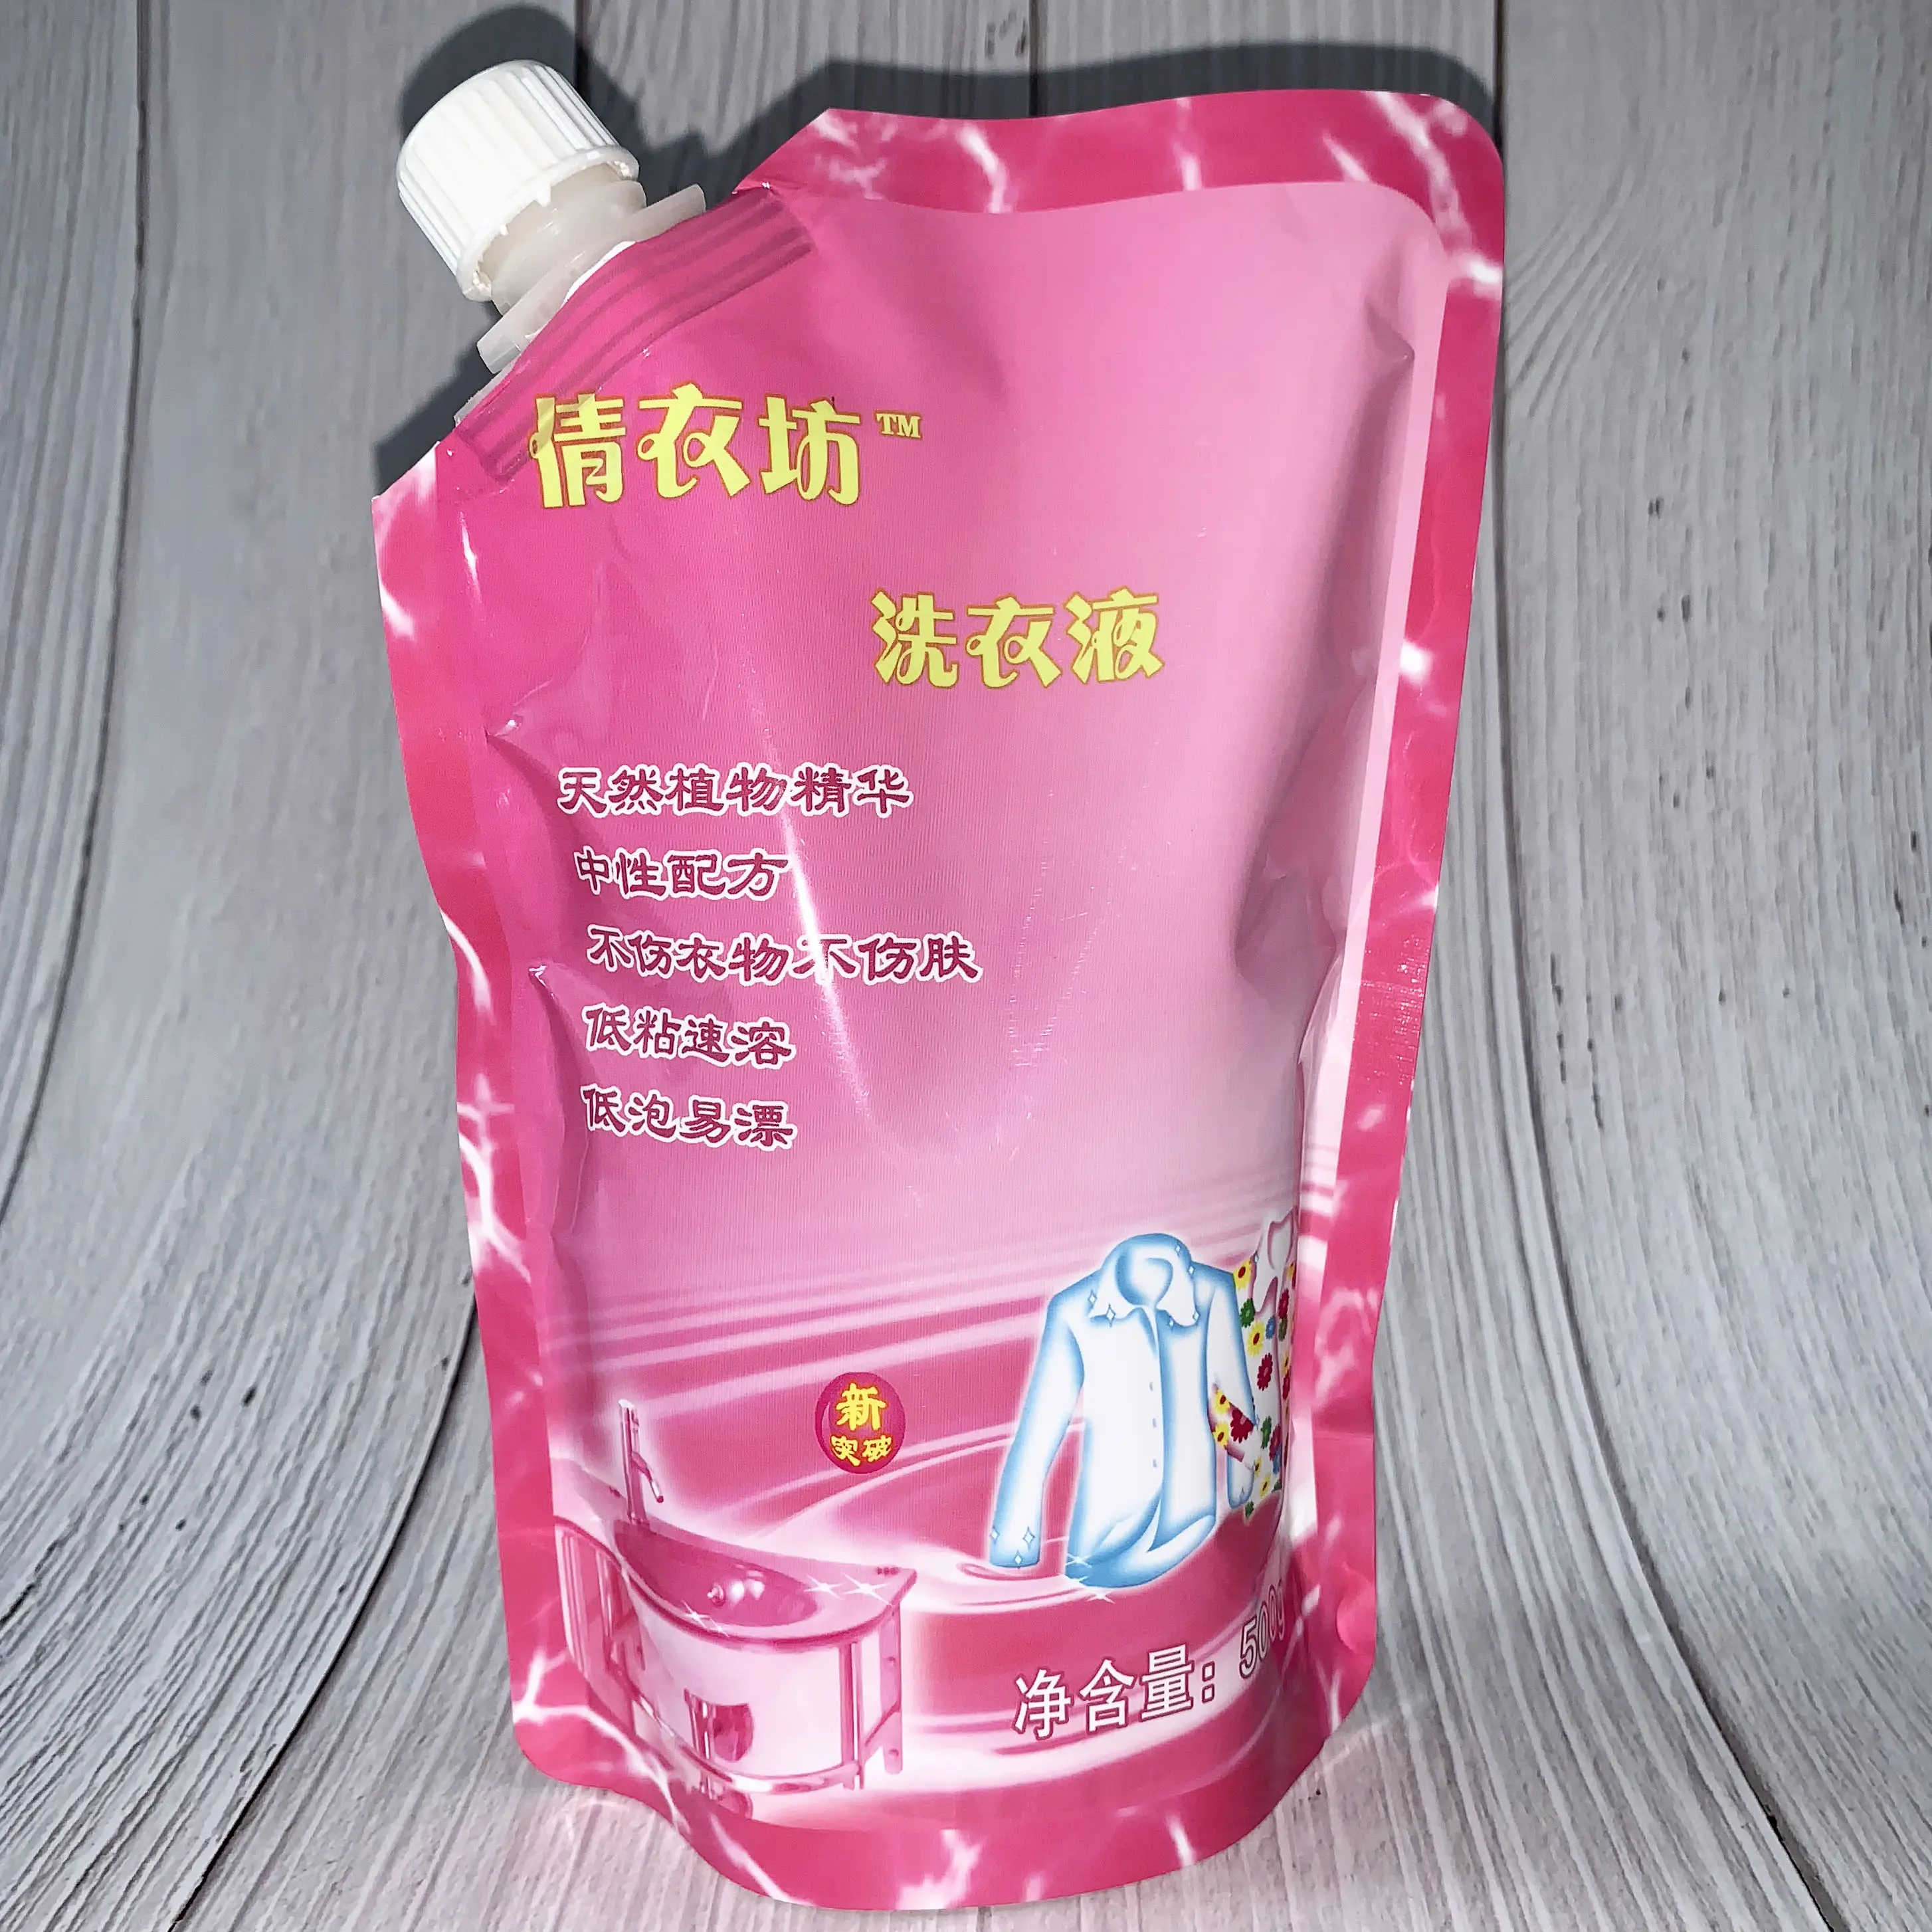 logo printed suction compound plastic bags Customized spout bag for juice, jelly, liquid, household products packaging